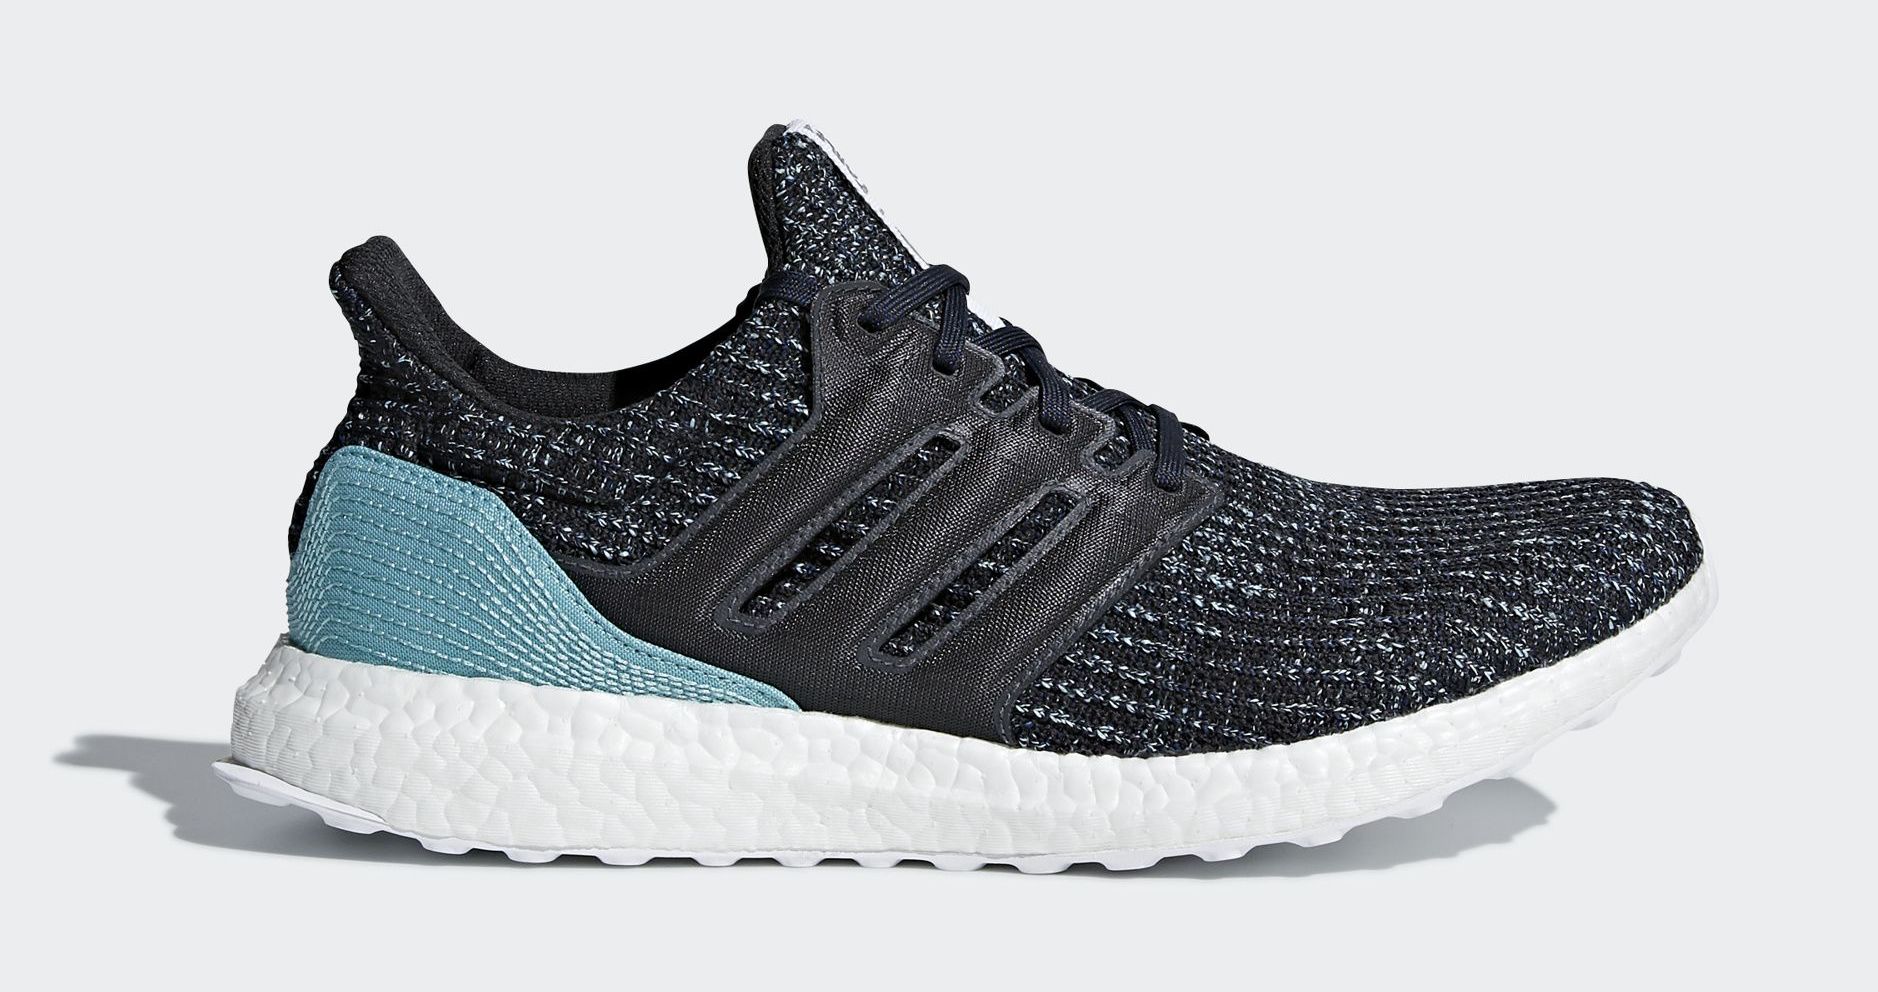 Parley x Adidas Ultra Boost CG3673 (Lateral)